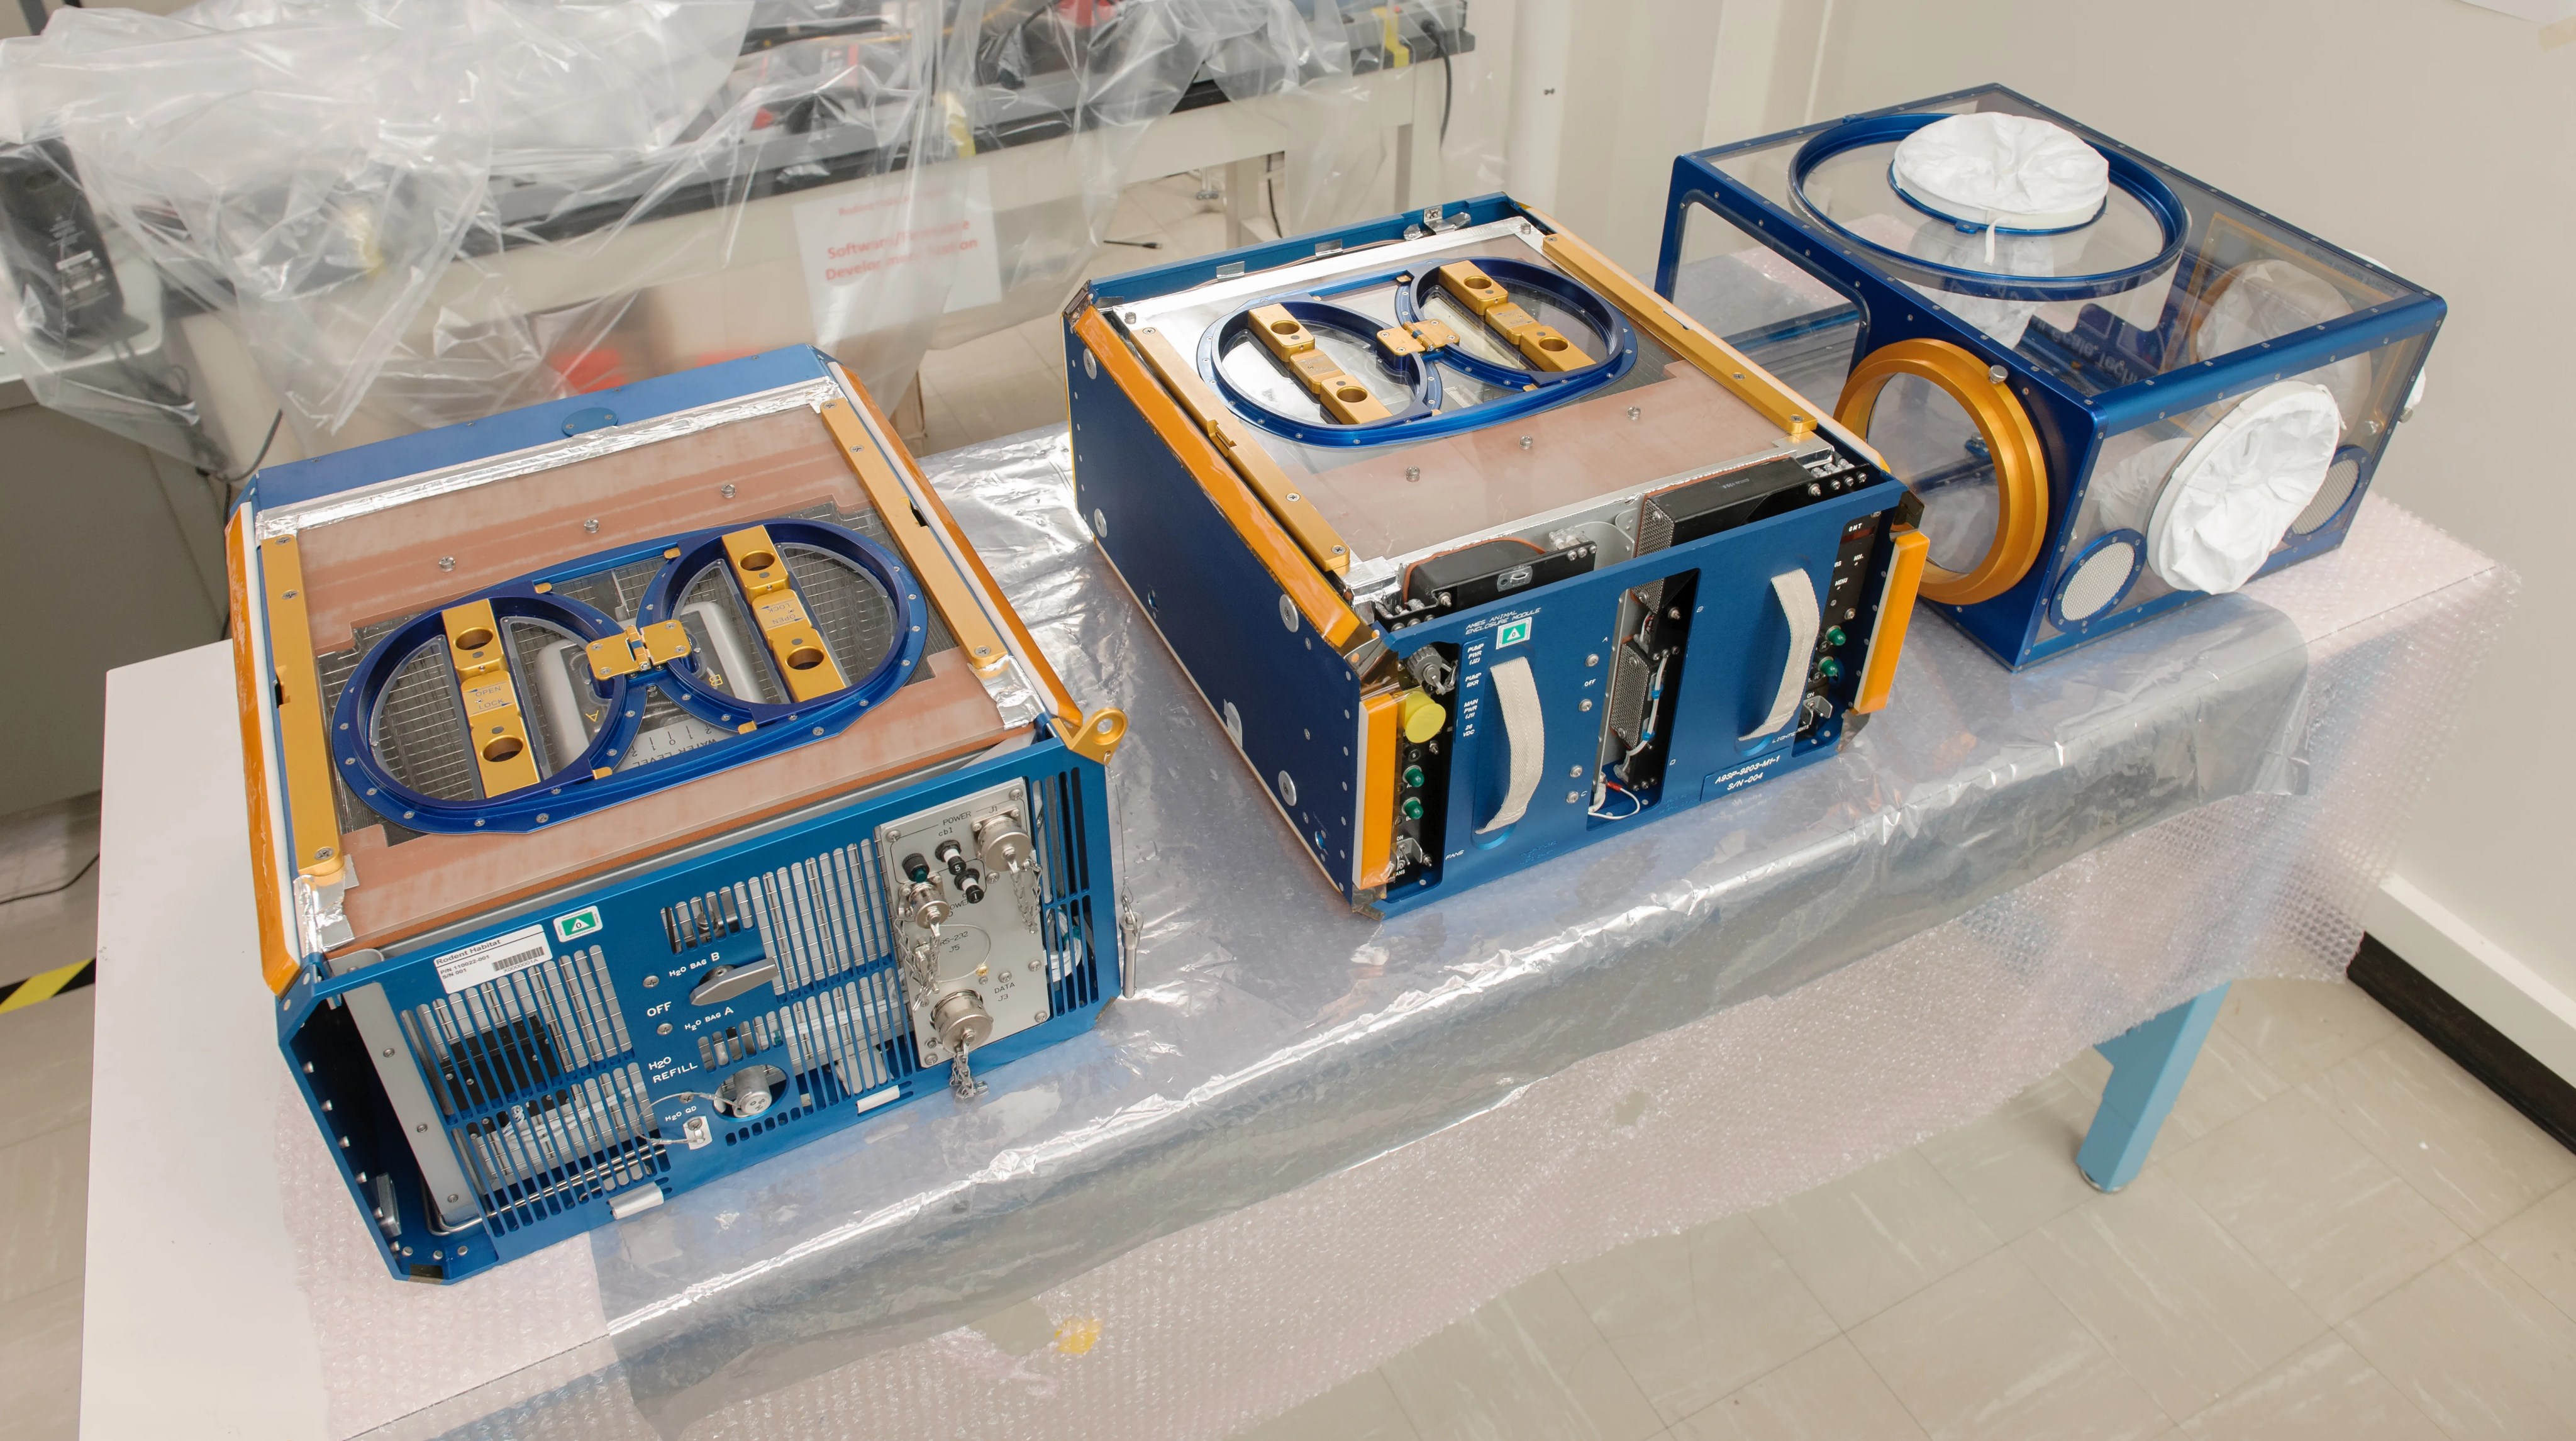 The Rodent Research Hardware System includes three modules: (left) habitat, (center) transporter, and (right) animal access unit